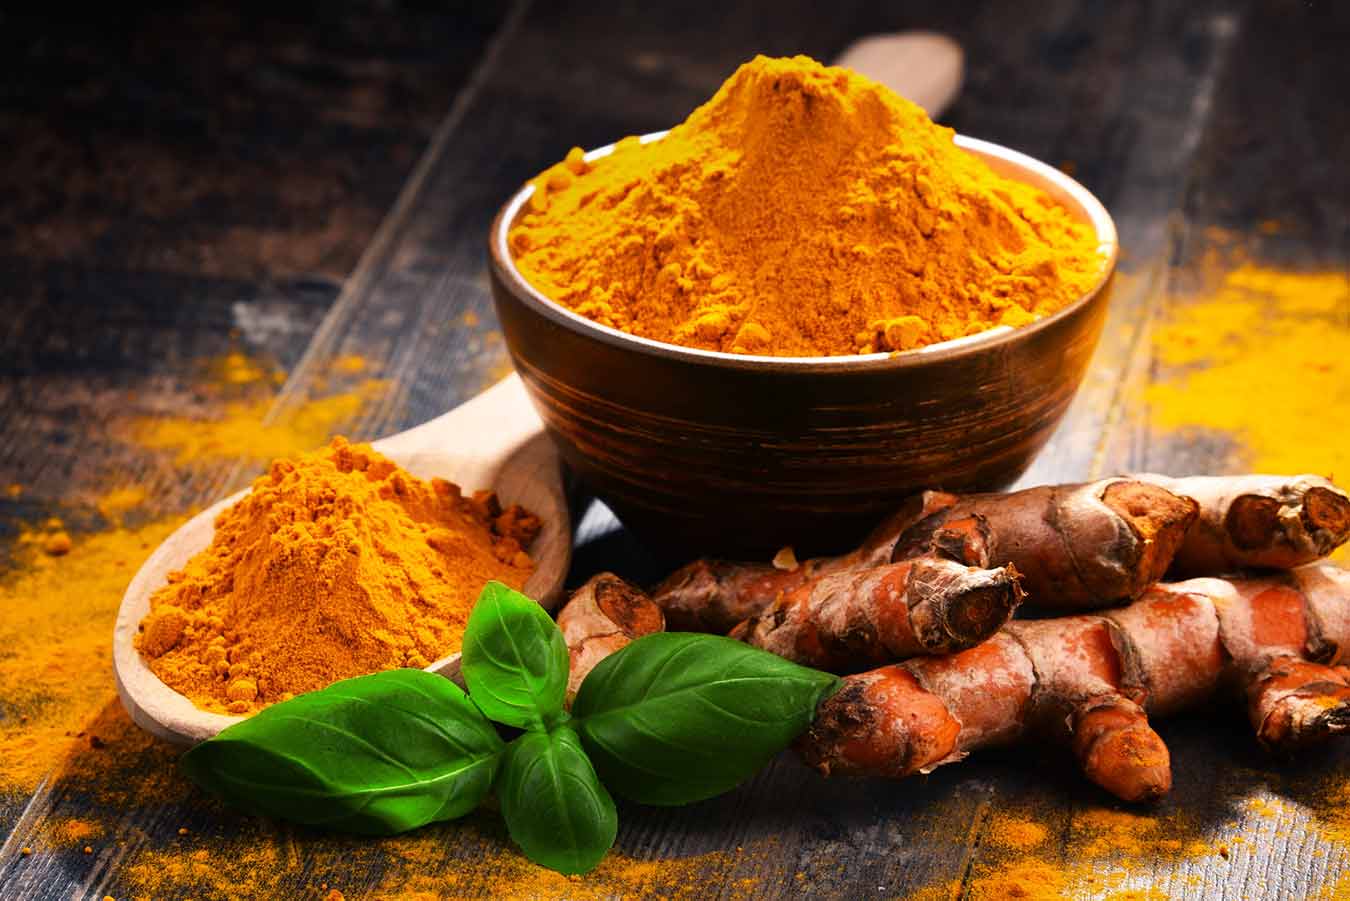 What does turmeric do?